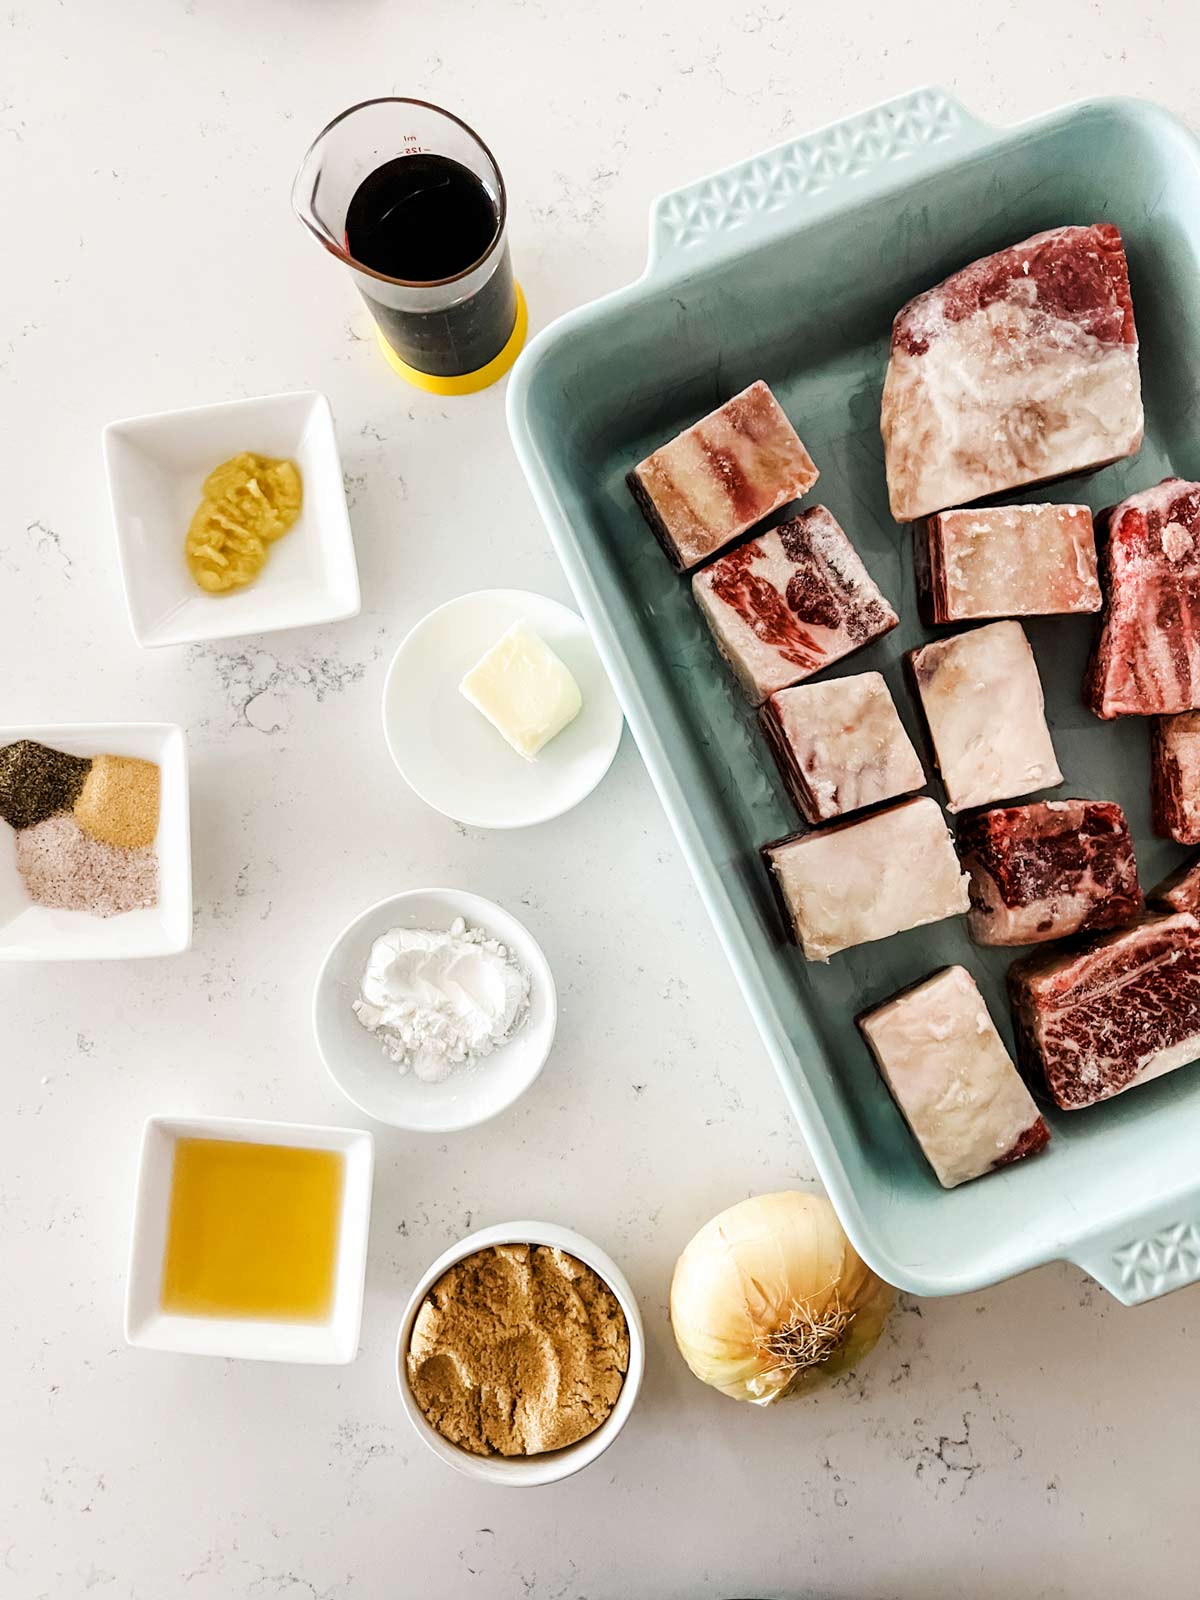 Soy sauce, water, light brown sugar, sesame oil, sea salt, garlic powder, fresh grated ginger, black pepper, bone-in short ribs, butter, yellow onion finely chopped and cornstarch in prep containers.